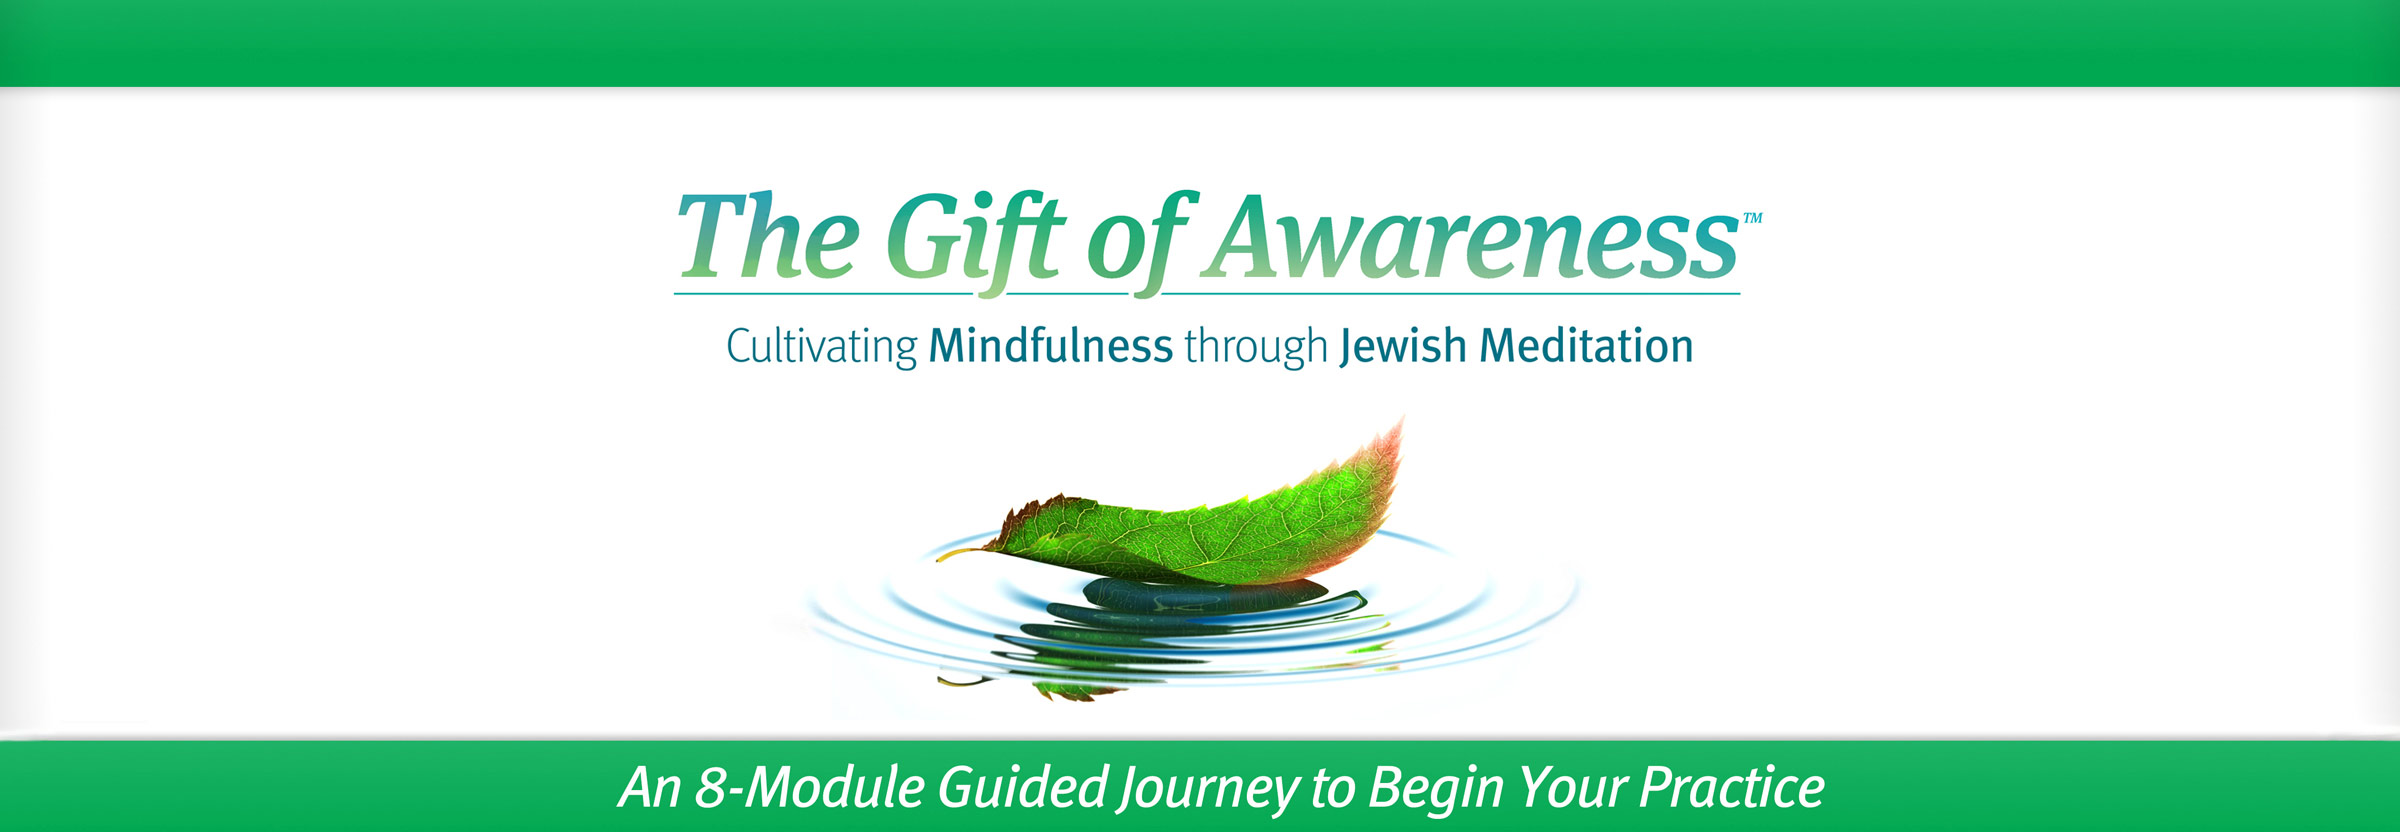 The Institute for Jewish Spirituality presents The Gift of Awareness for Educators. Jewish Mindfulness for You and Your Students: A 13-Module Guided Journey